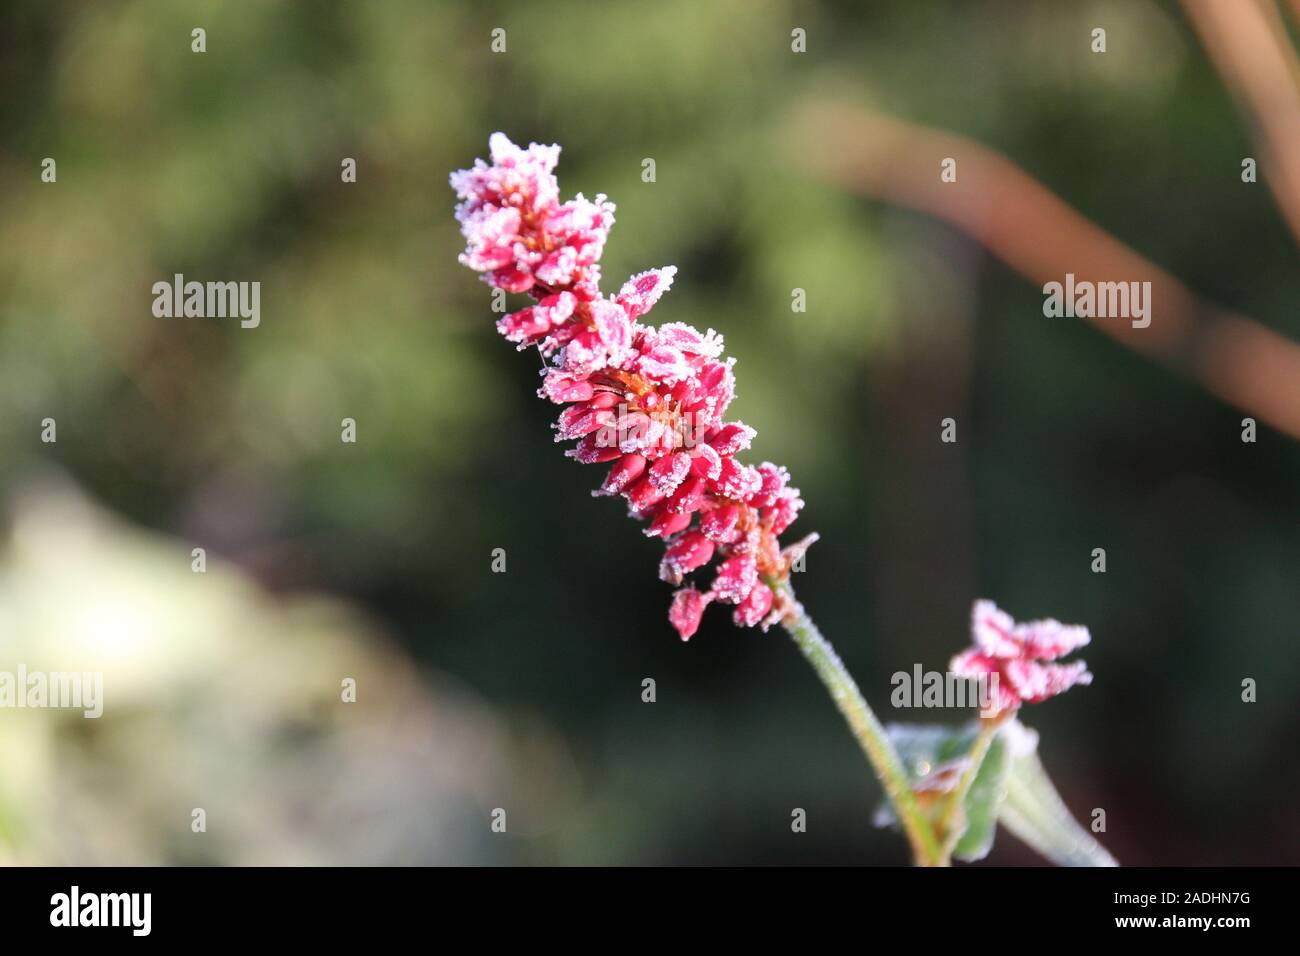 Blooming knotweed Persicaria amplexicaulis firetail in the morning light. Red flowers in the winter morning sun on blurred background Stock Photo